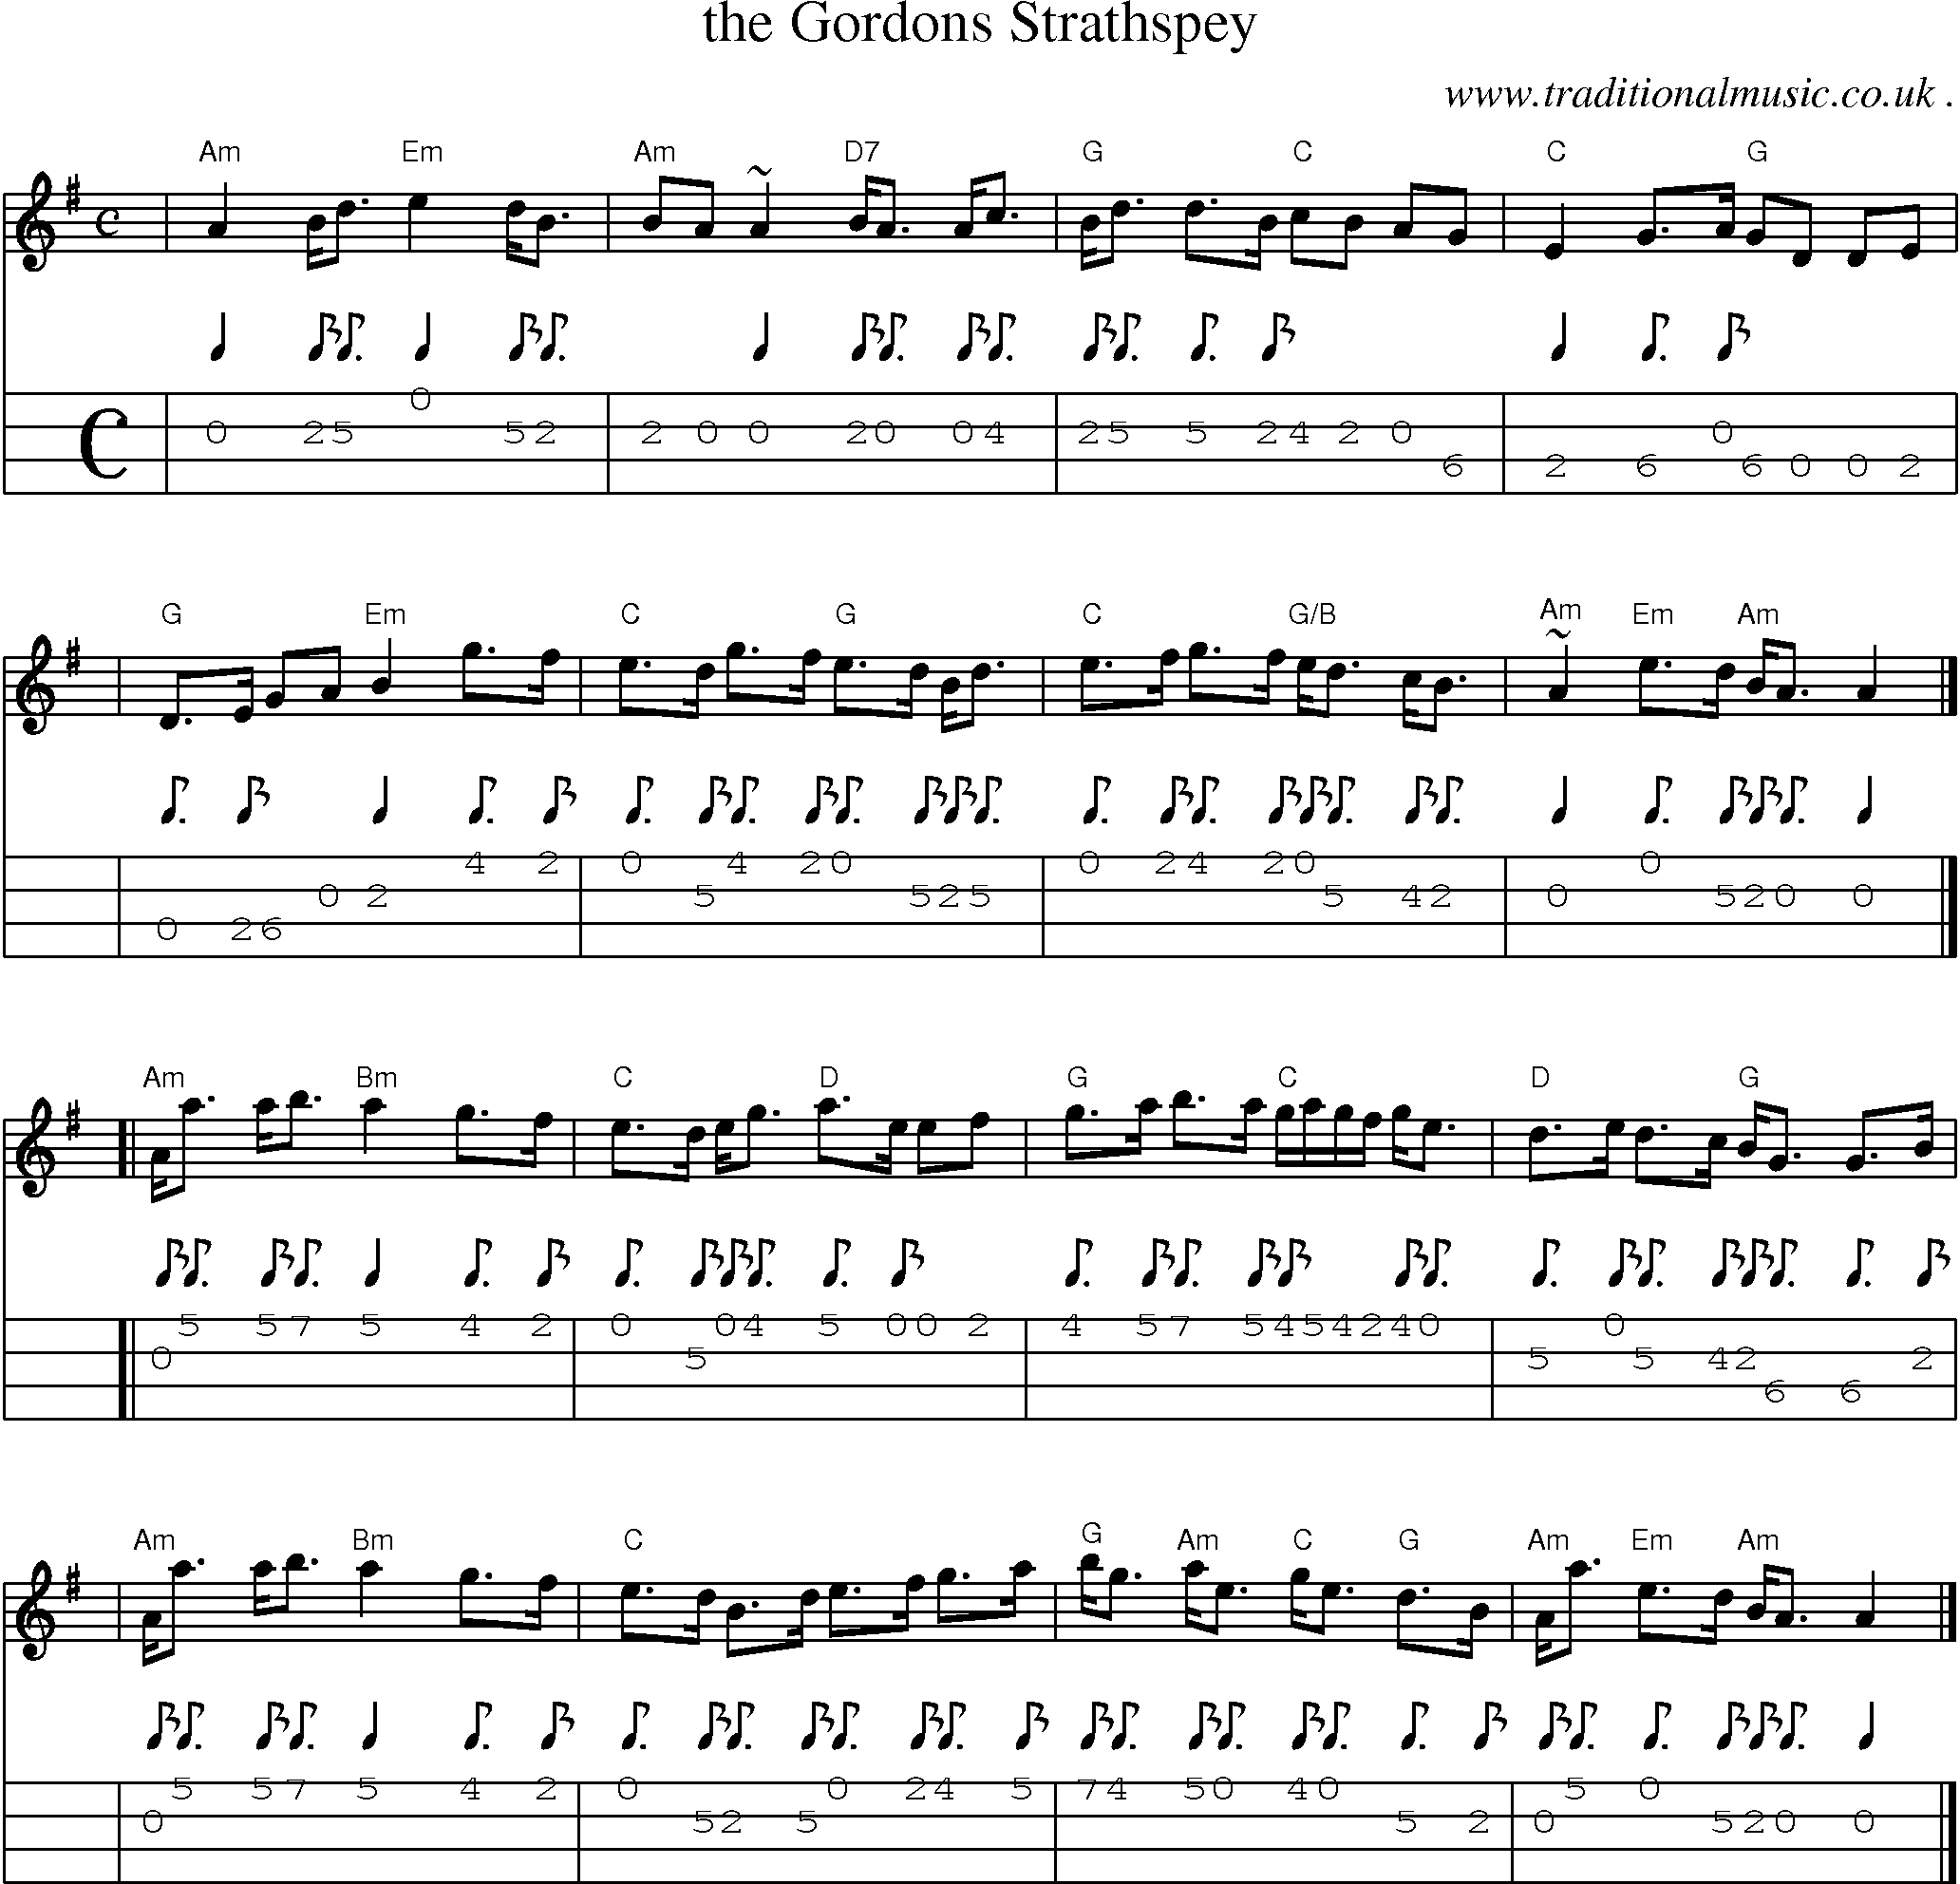 Sheet-music  score, Chords and Mandolin Tabs for The Gordons Strathspey